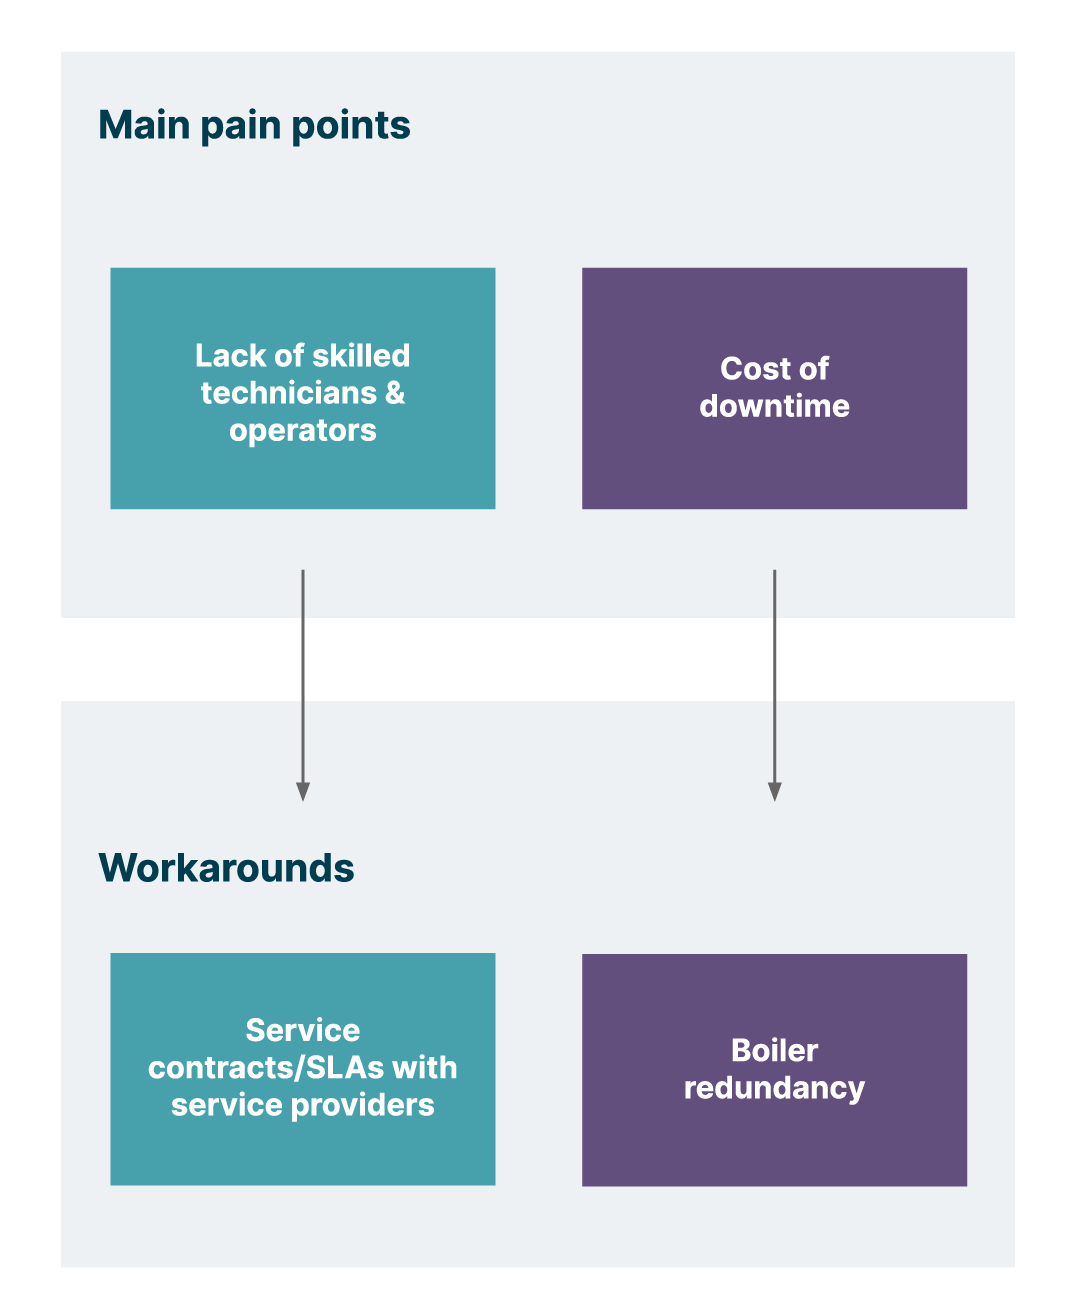 : A graphic depicting two industry pain points and their workarounds. The first pain point is the lack of skilled technicians and operators, which is addressed through service contracts or SLAs. The second pain point is the cost of downtime, which is addressed through equipment redundancy.